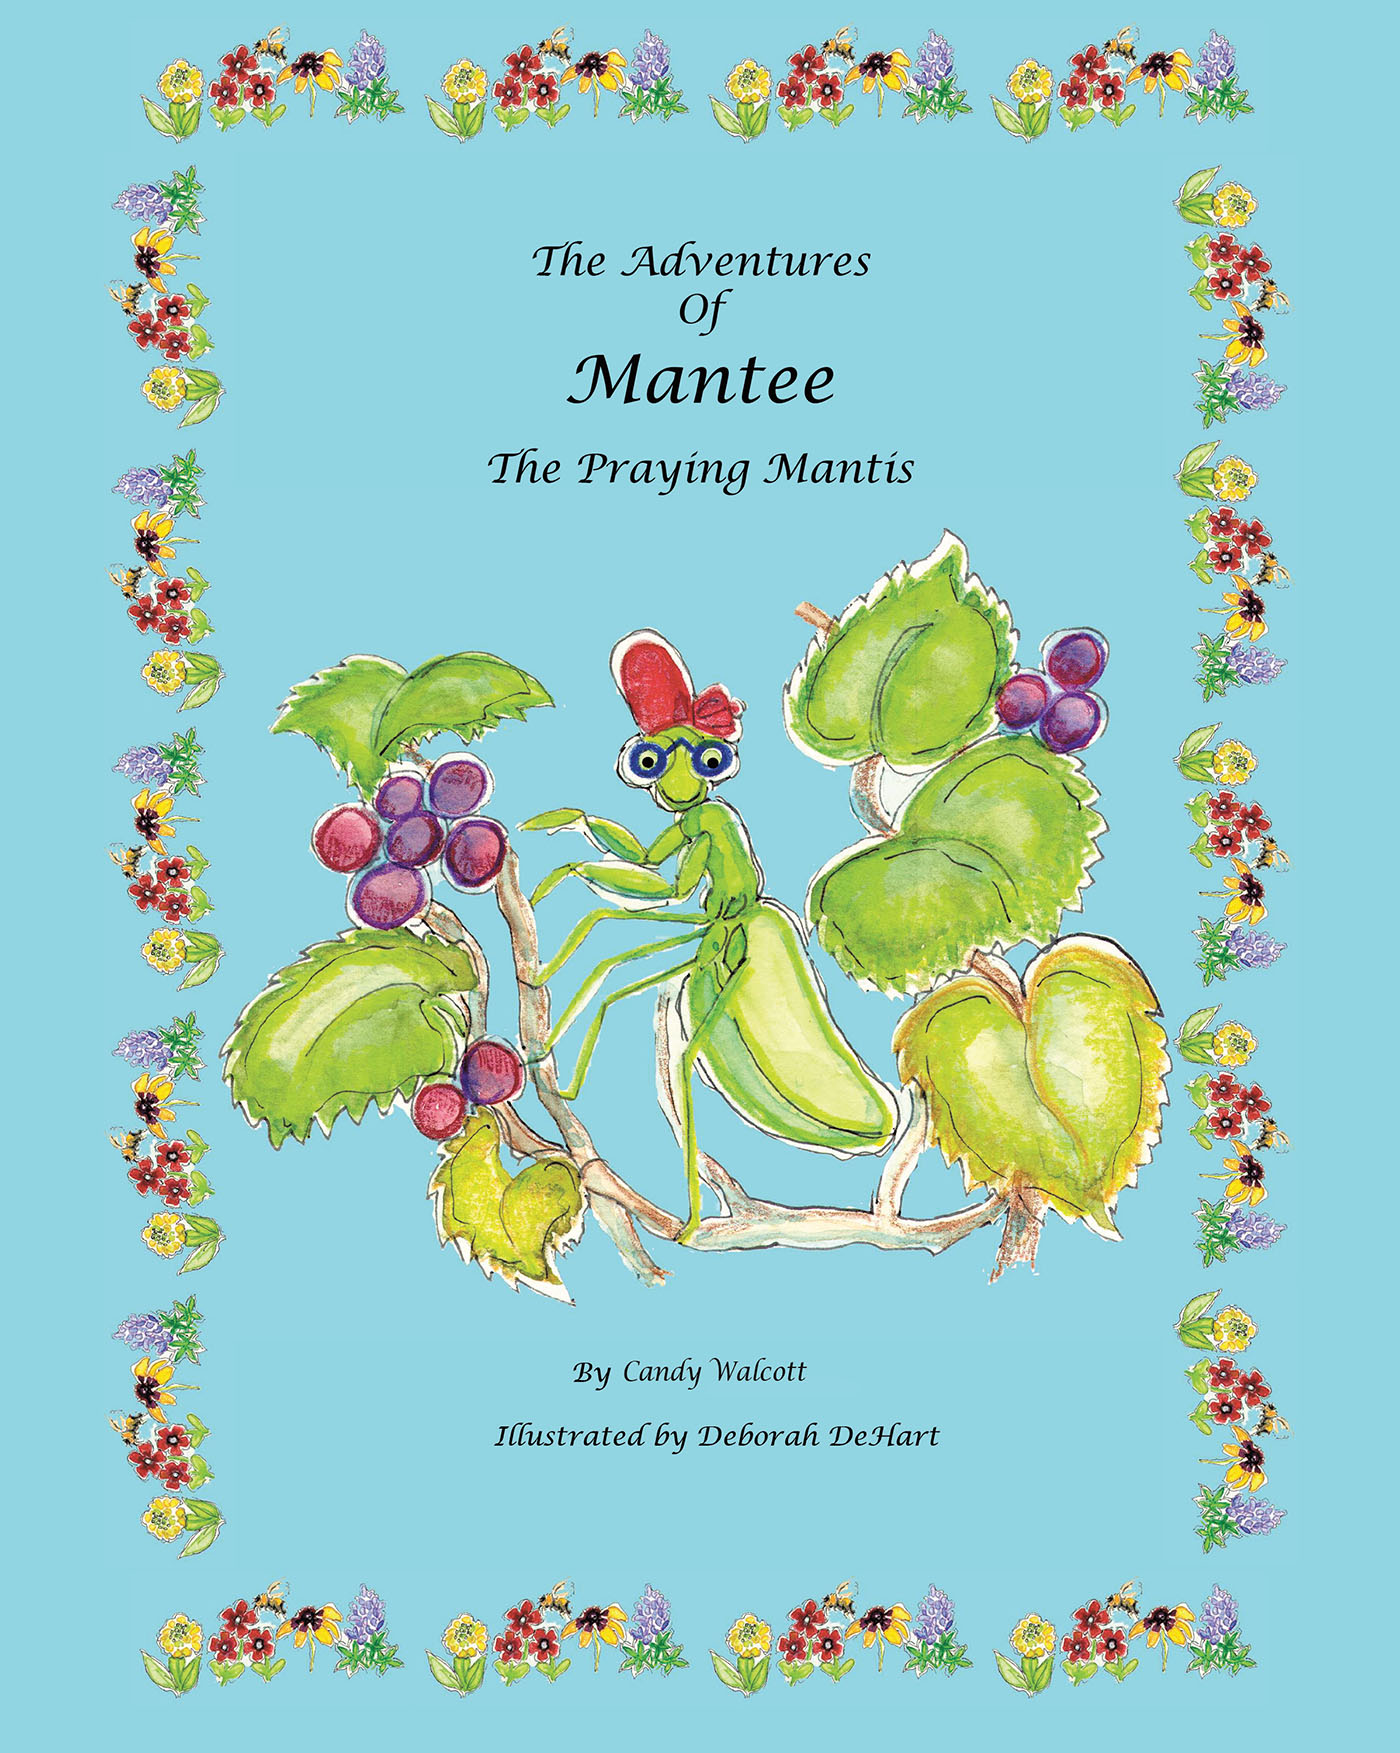 Candy Walcott’s Newly Released "The Adventures of Mantee the Praying Mantis" is a Delightful Adventure That Teaches a Unique Story of Growth